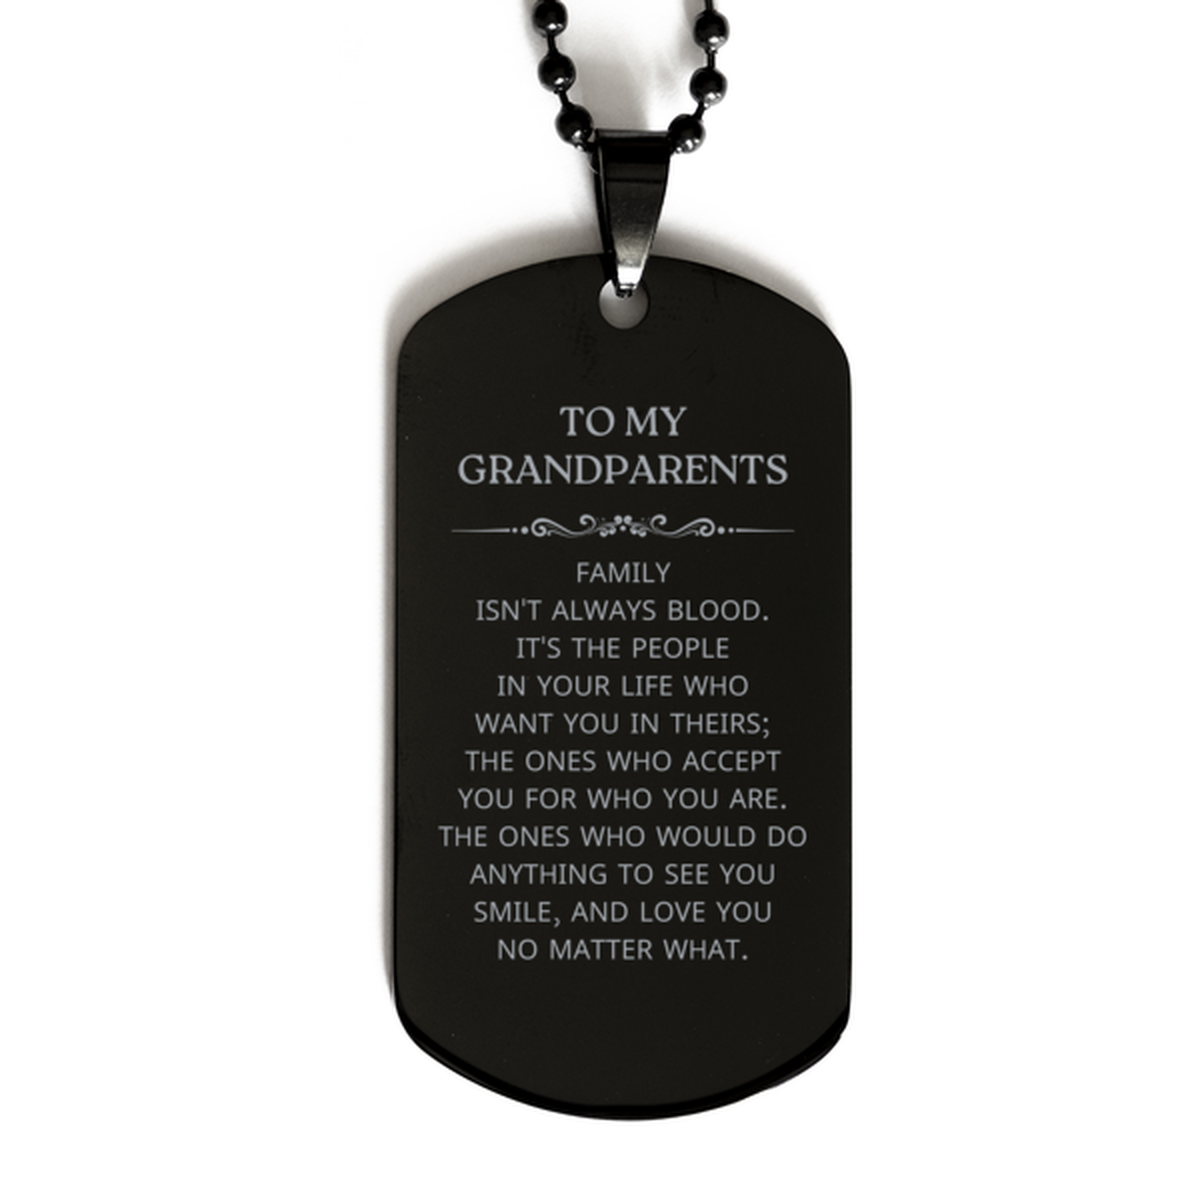 To My Grandparents Gifts, Family isn't always blood, Grandparents Black Dog Tag, Birthday Christmas Unique Present For Grandparents